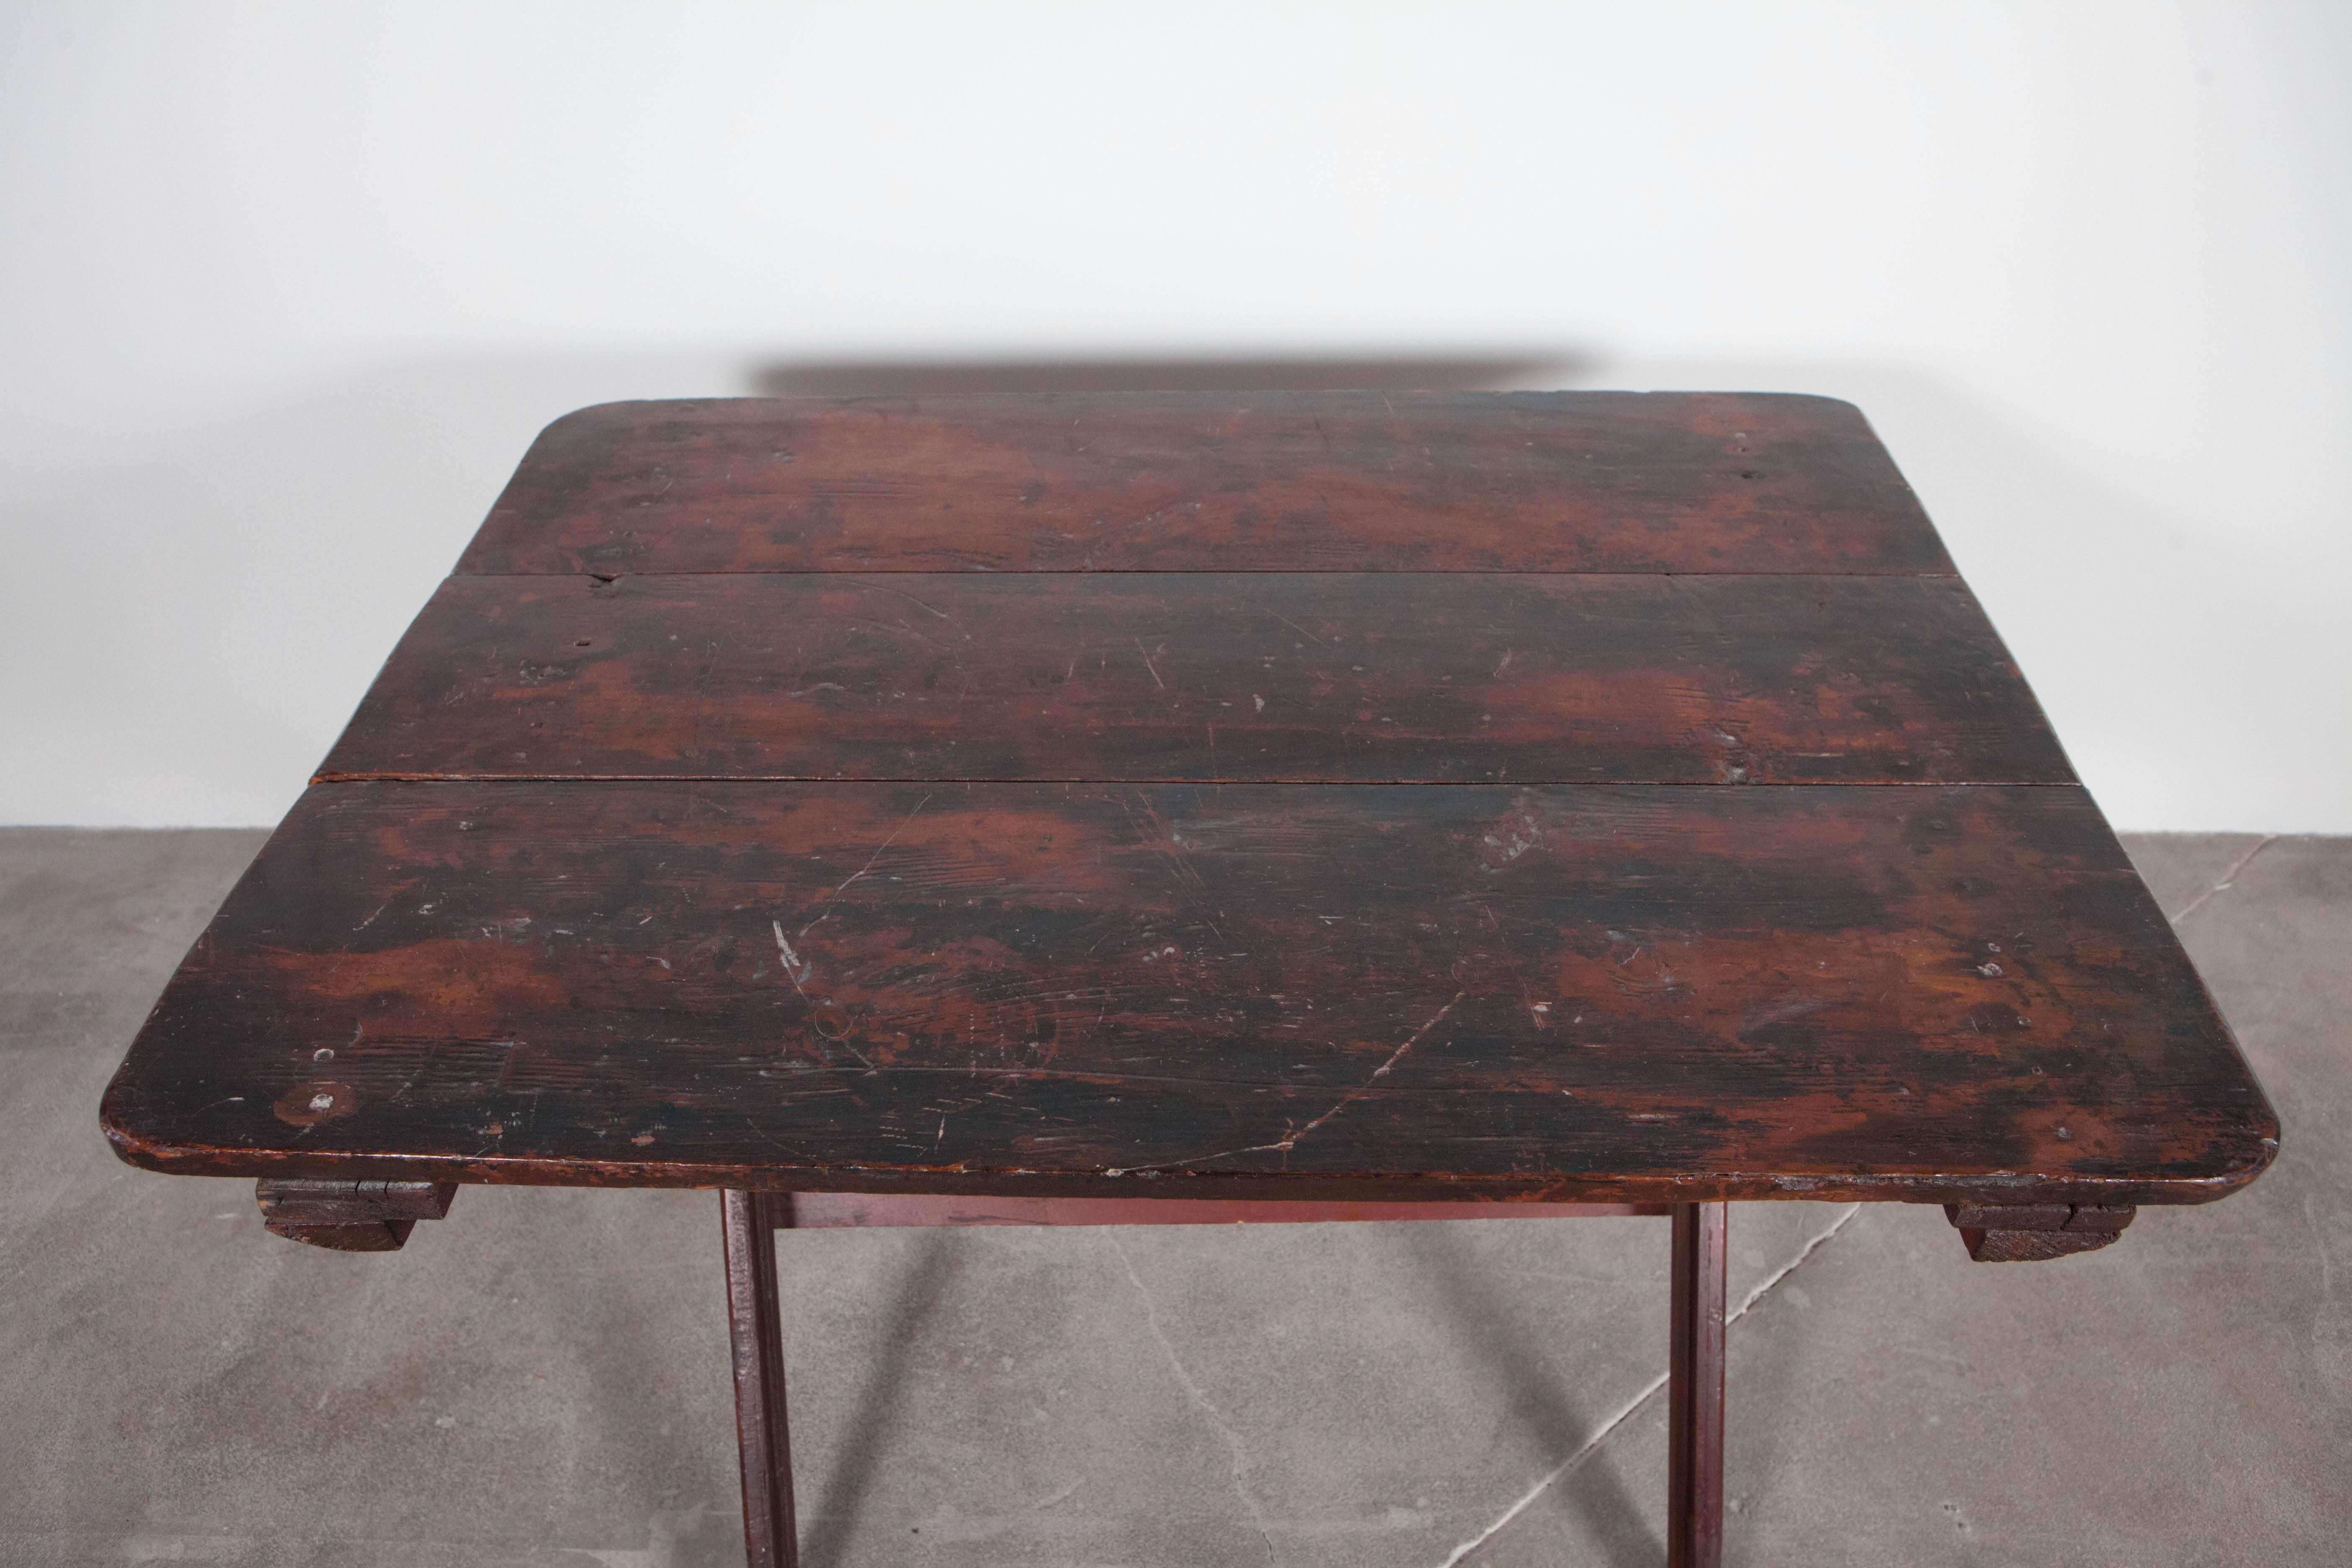 American Rustic Sawbuck Table with Scrubbed Top